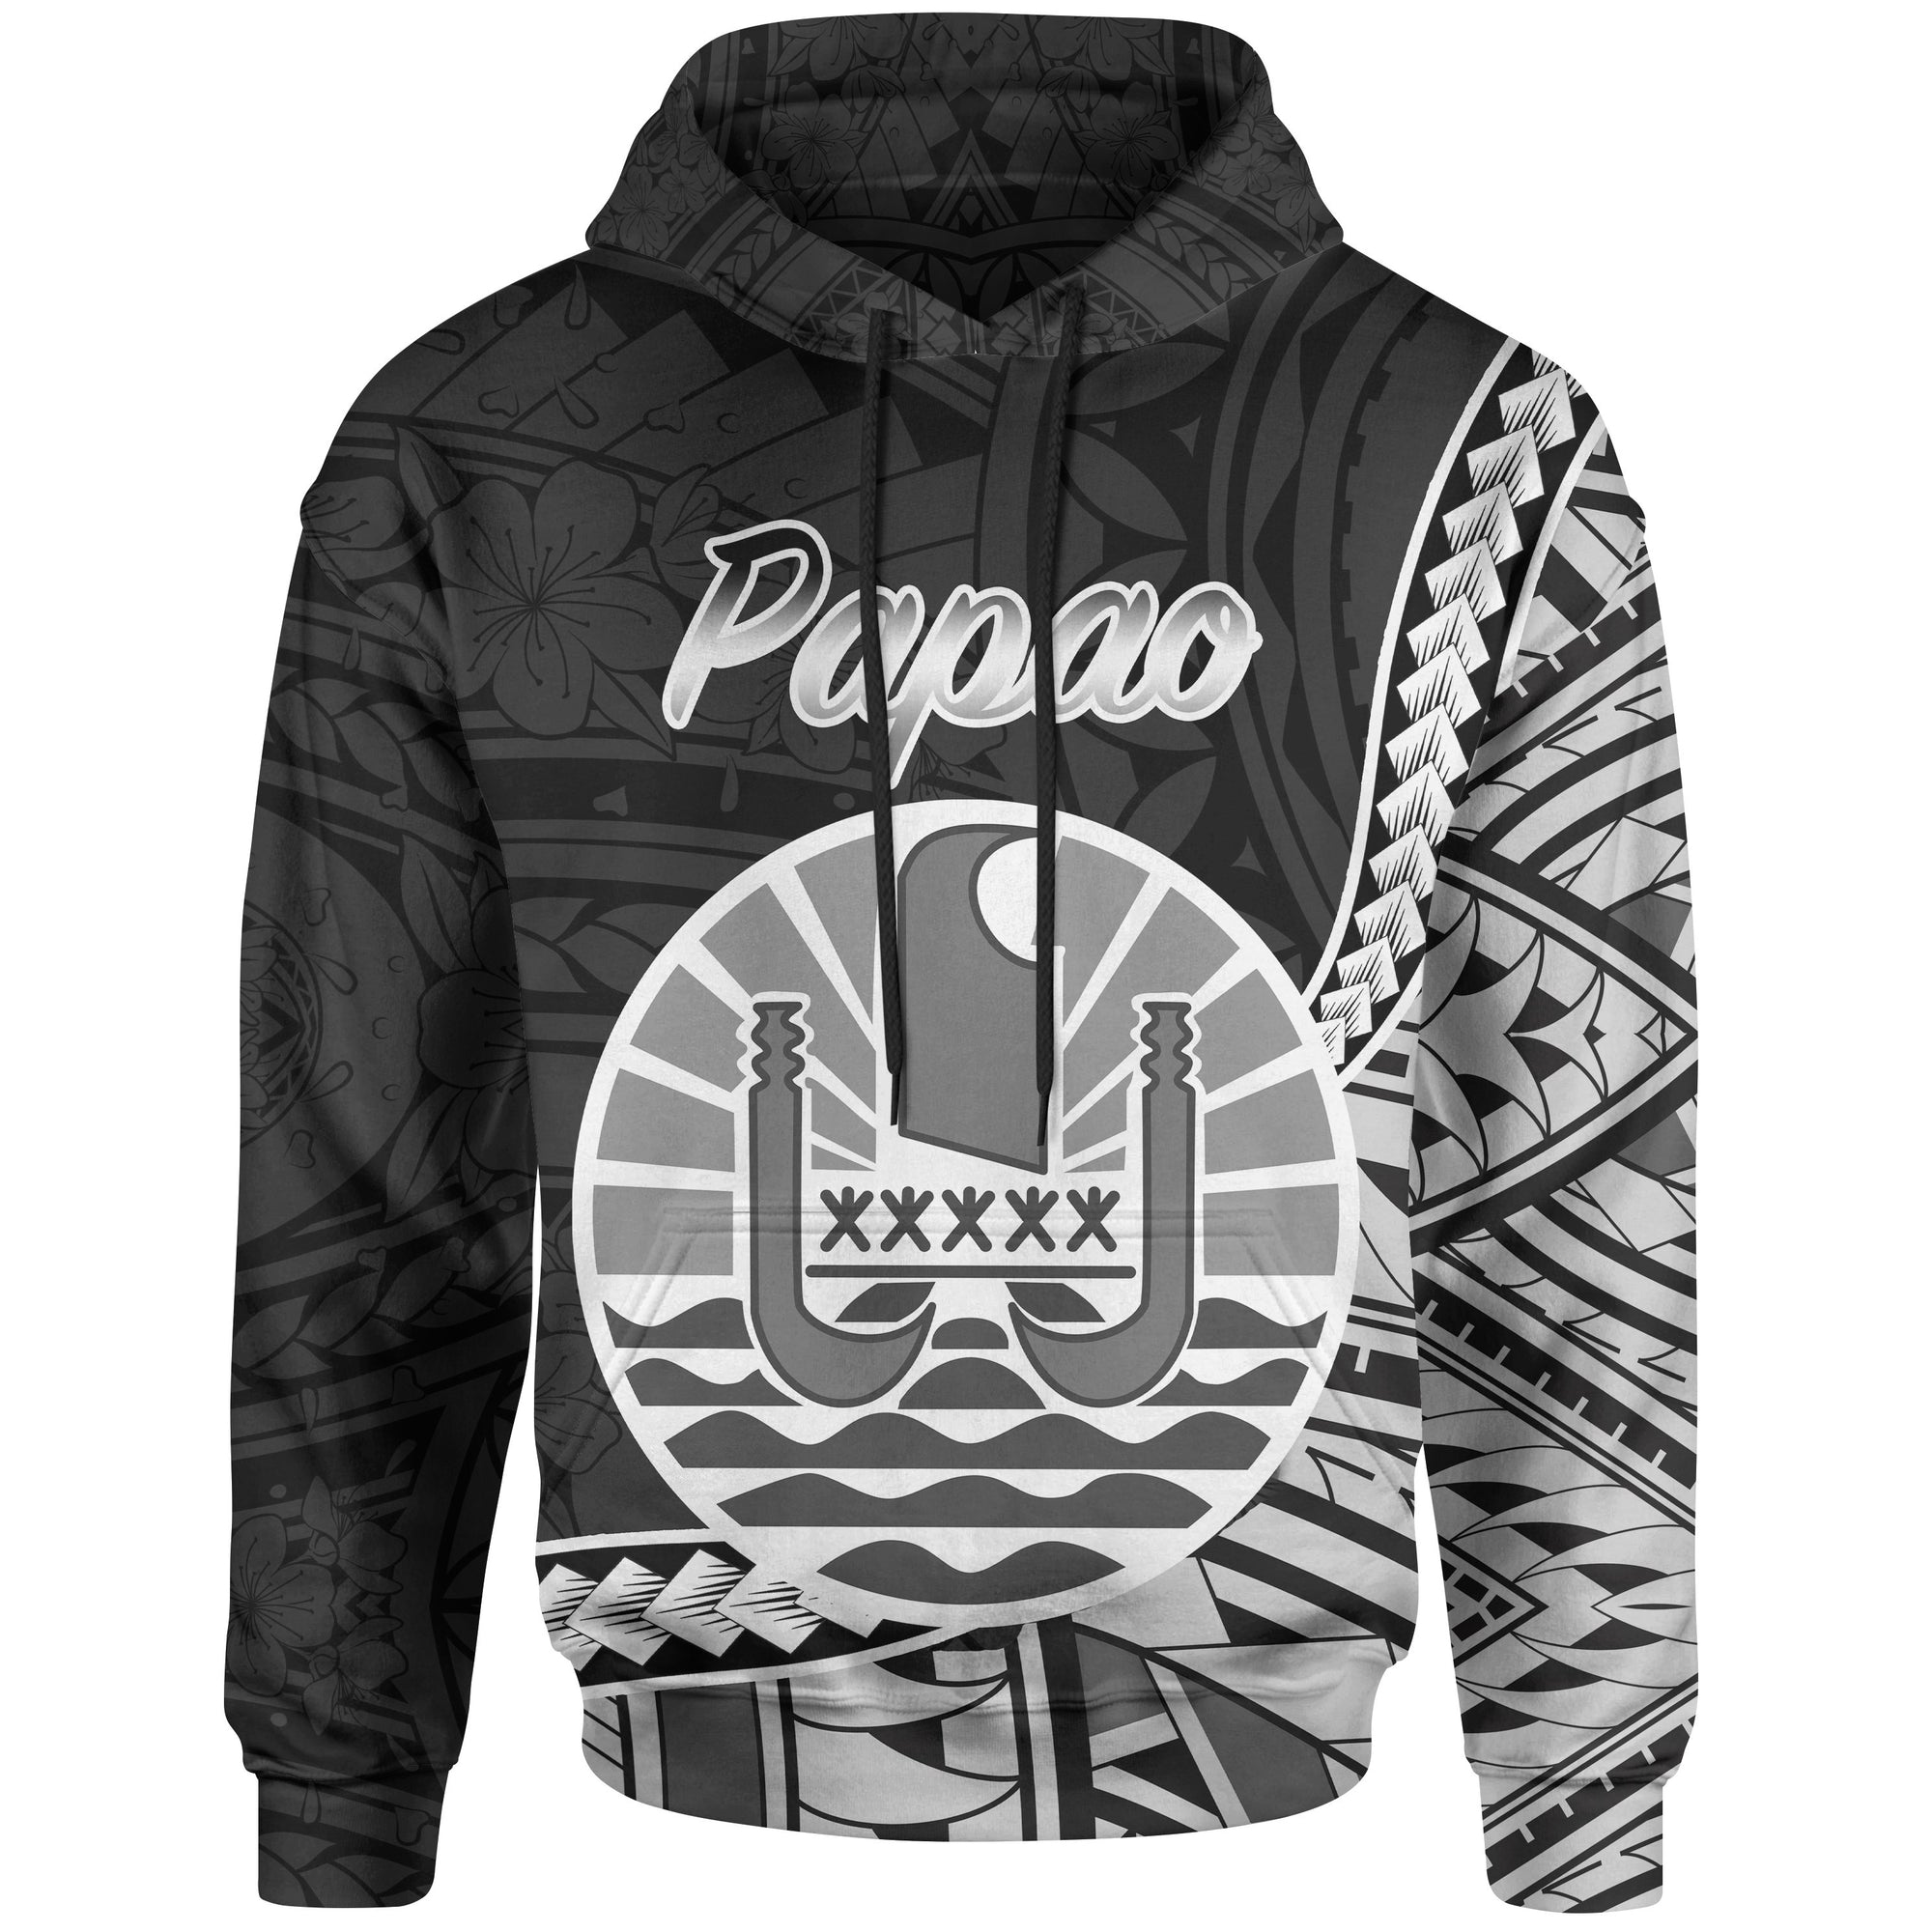 French Polynesia Hoodie Papao Seal of French Polynesia Polynesian Patterns Unisex Black - Polynesian Pride